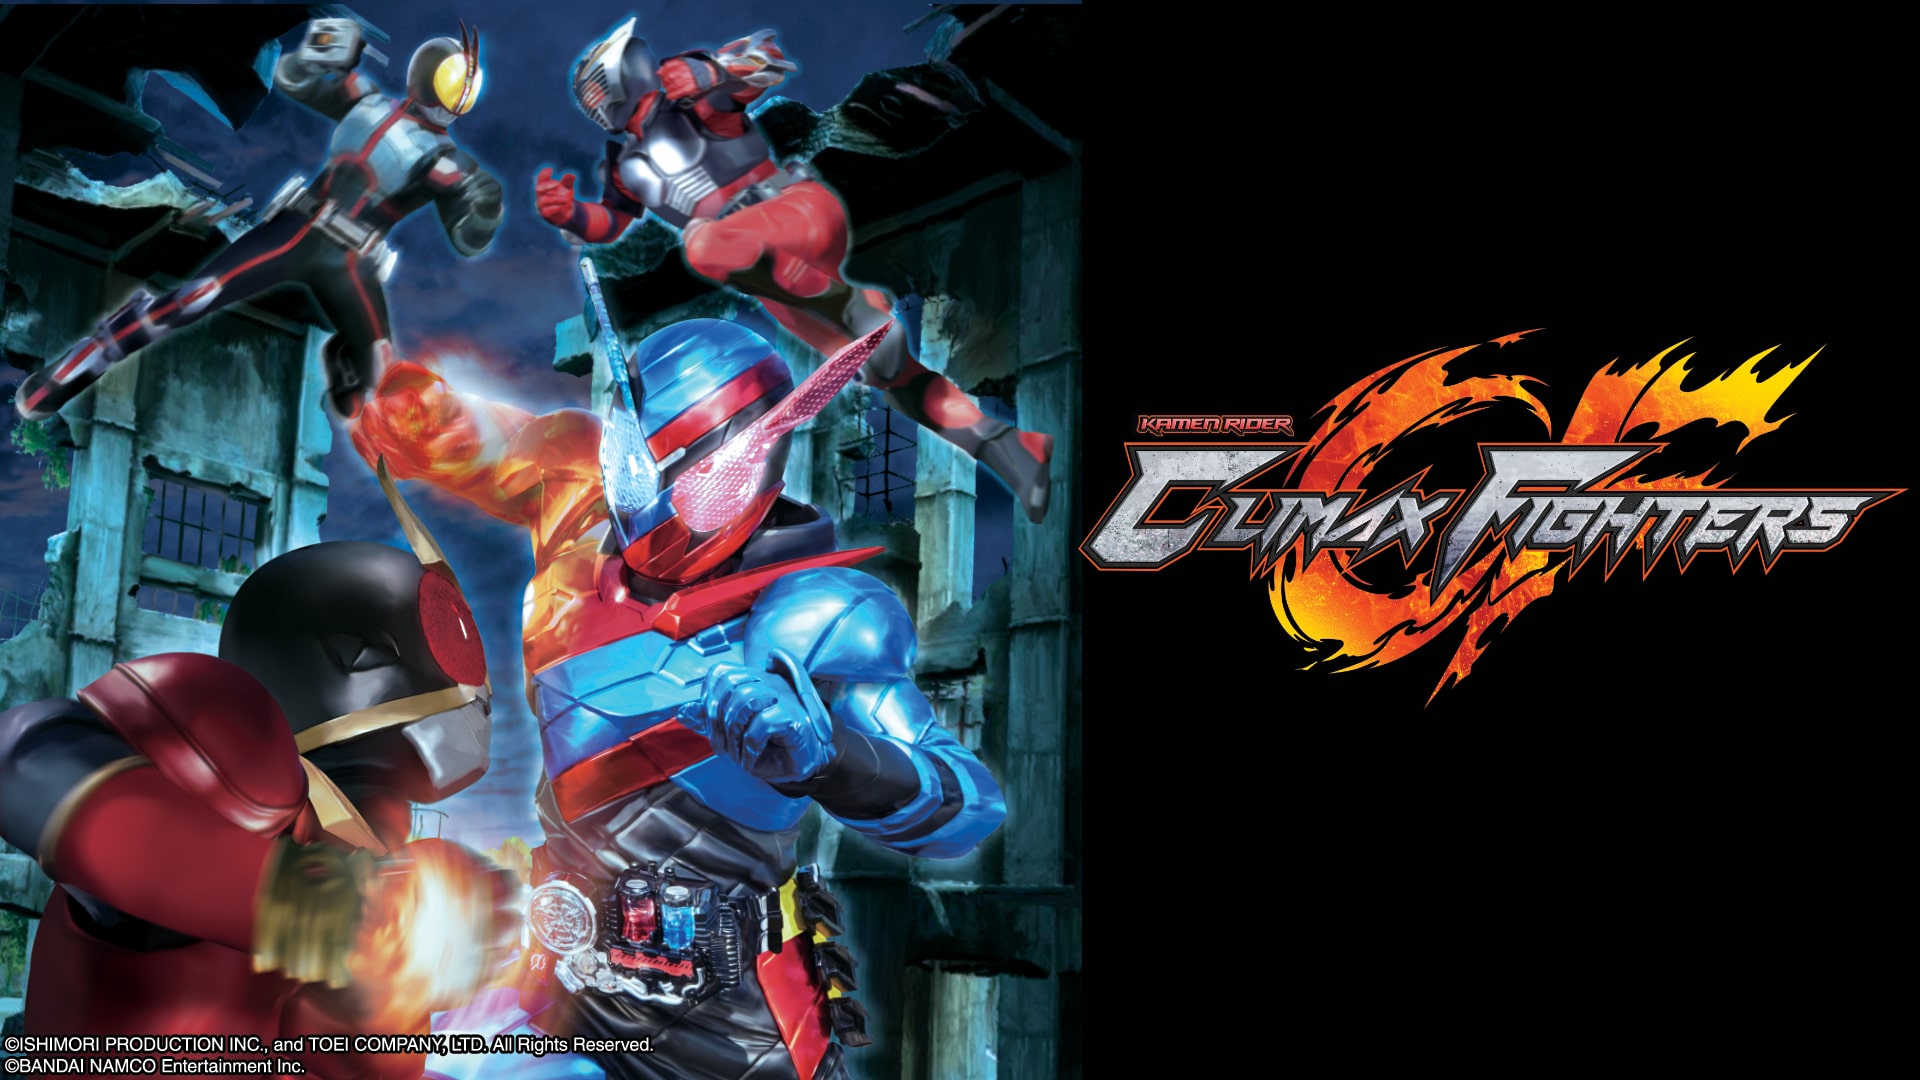 KAMEN RIDER CLIMAX FIGHTERS (English Ver.)